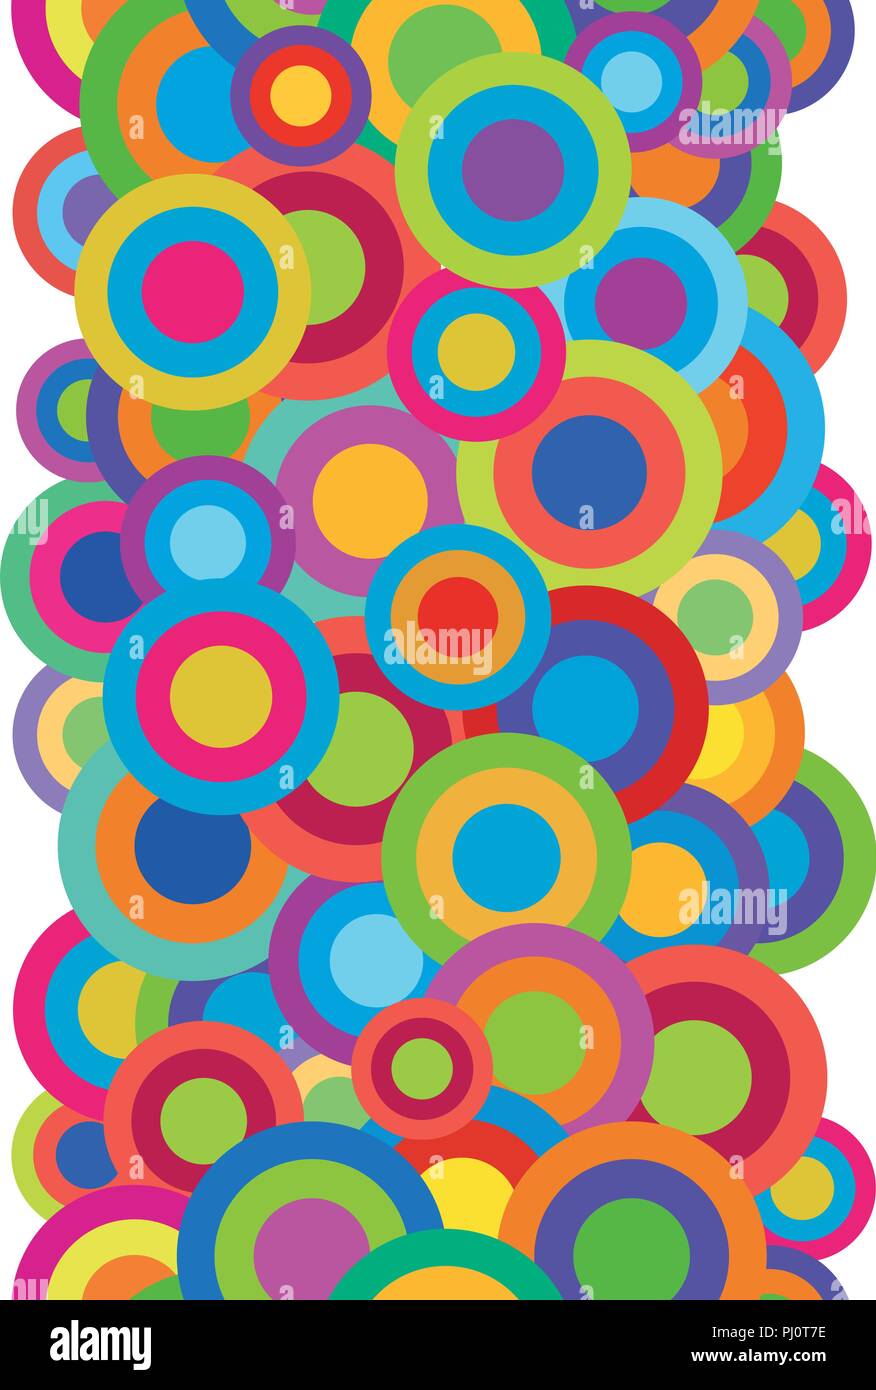 Vector round shapes seamless pattern Stock Vector